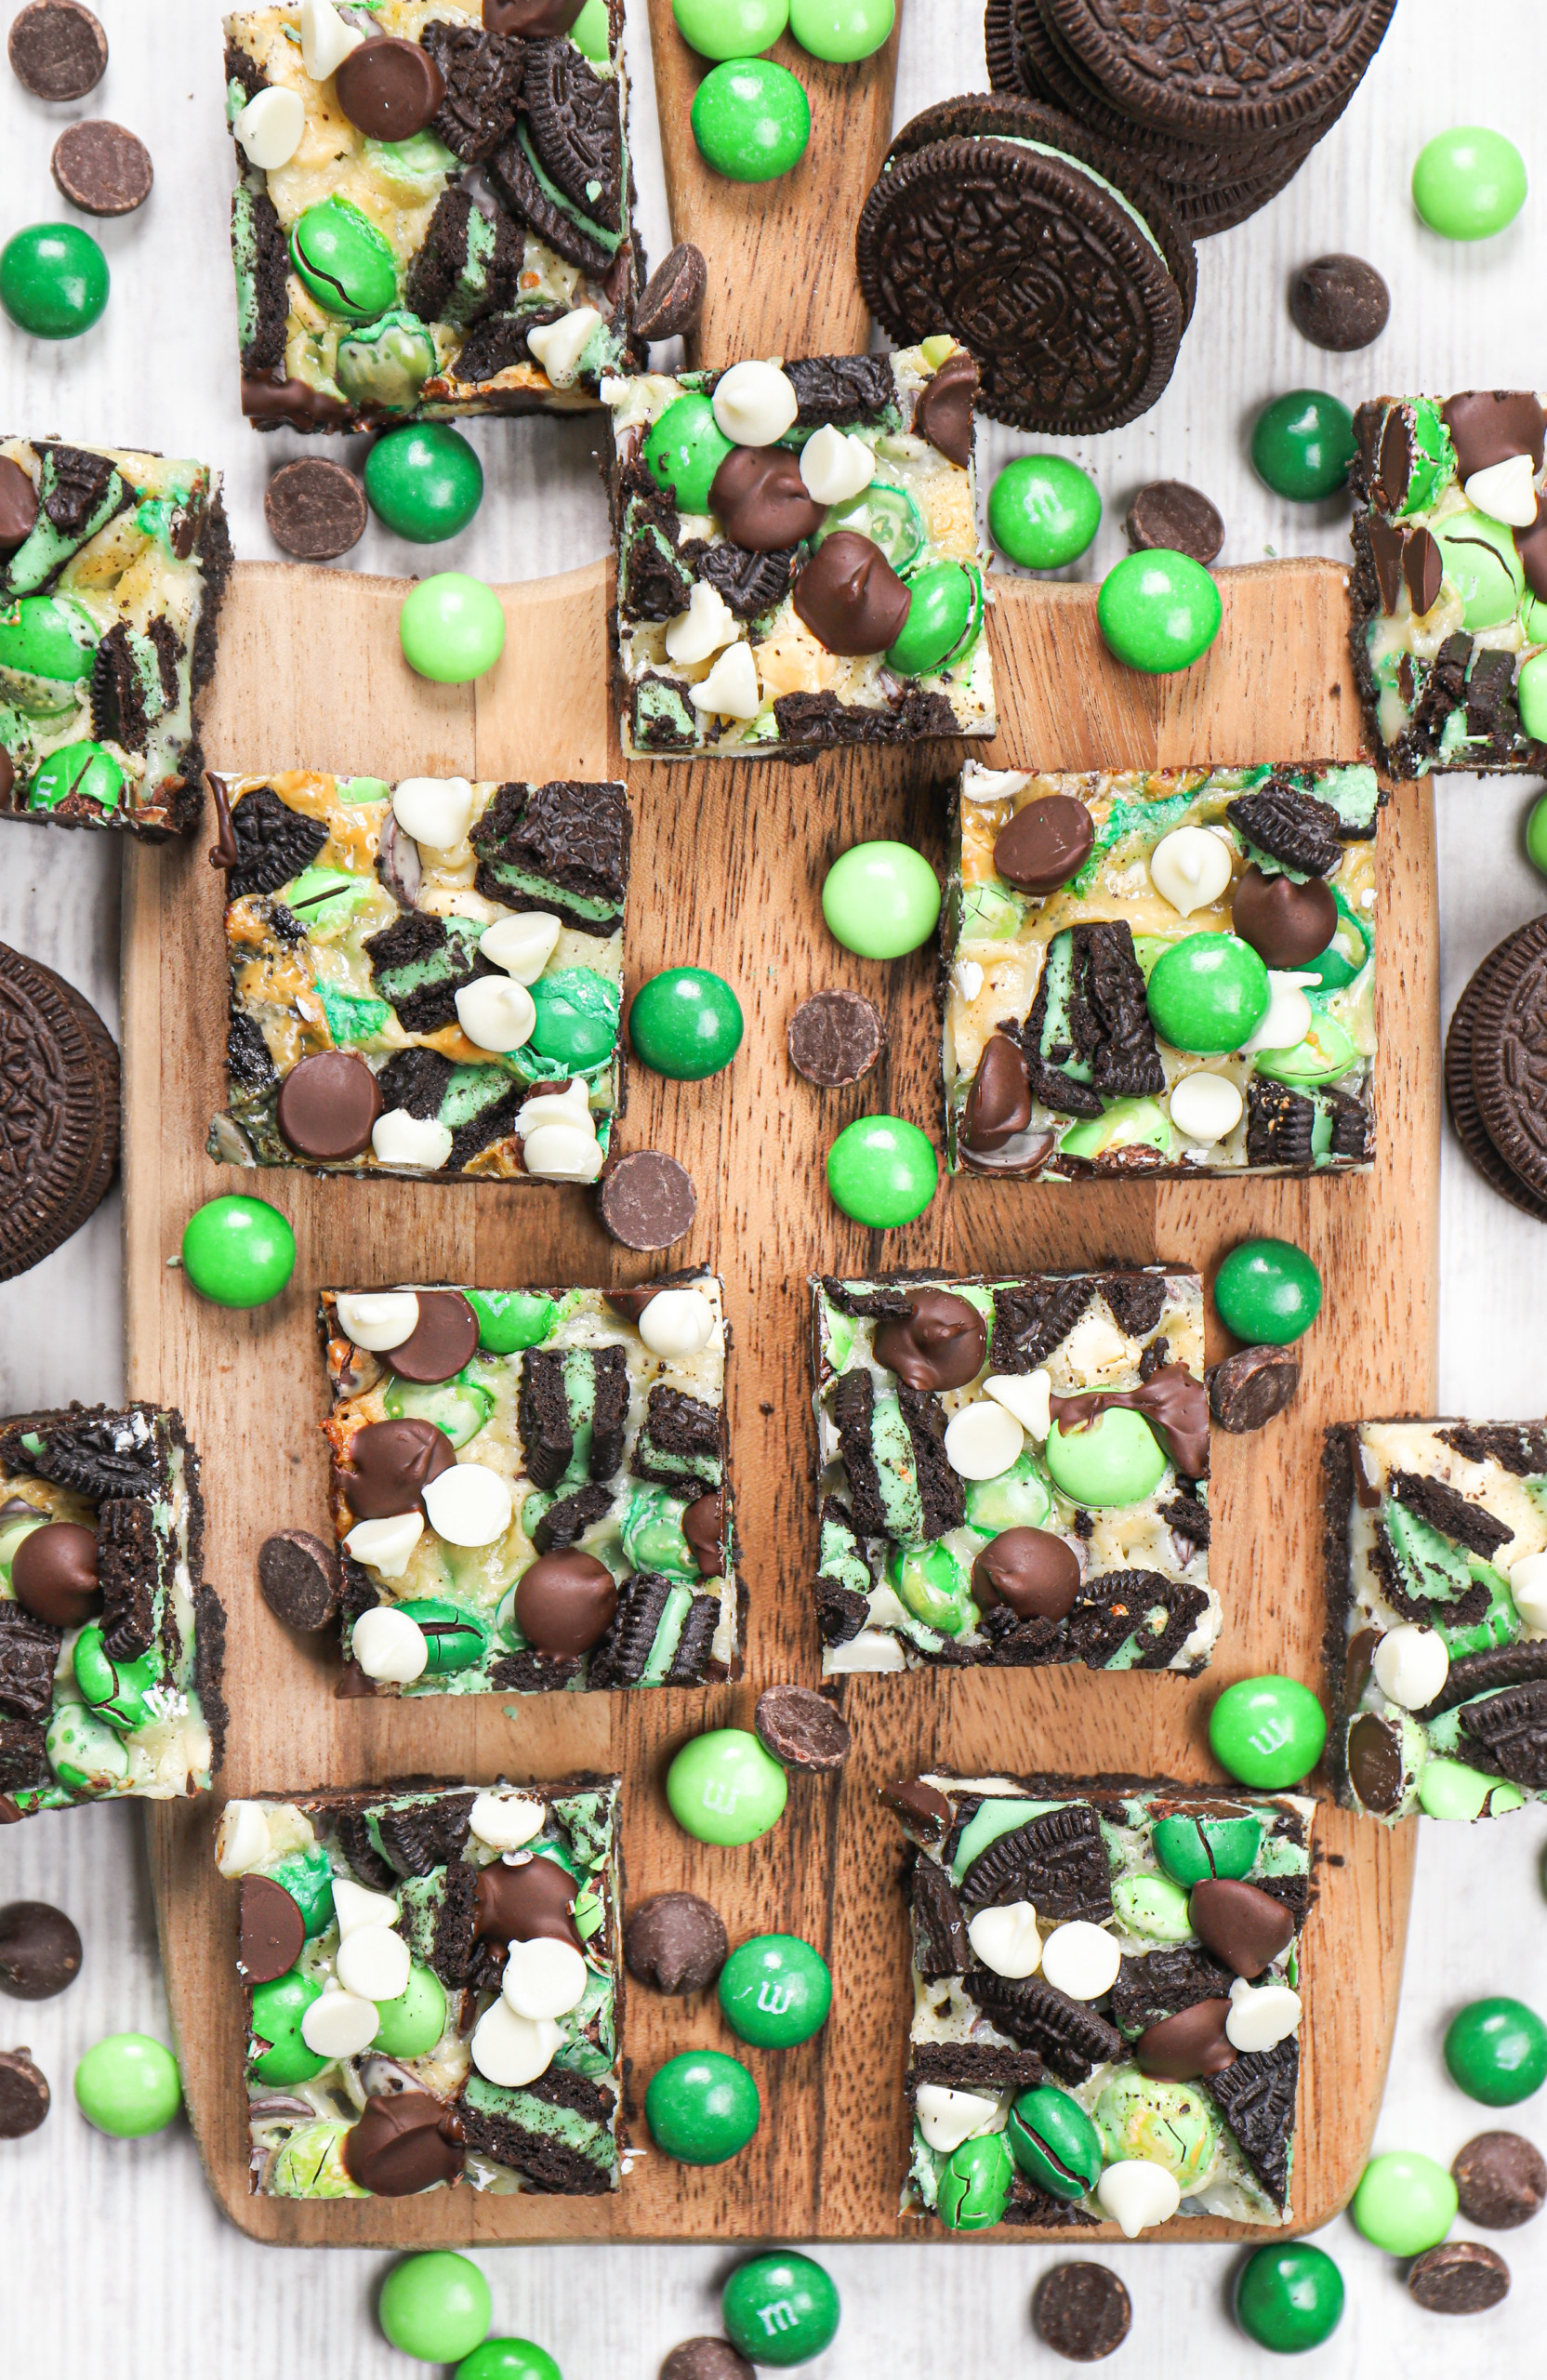 Overhead view of a batch of mint chocolate seven layer bars on a wooden cutting board.